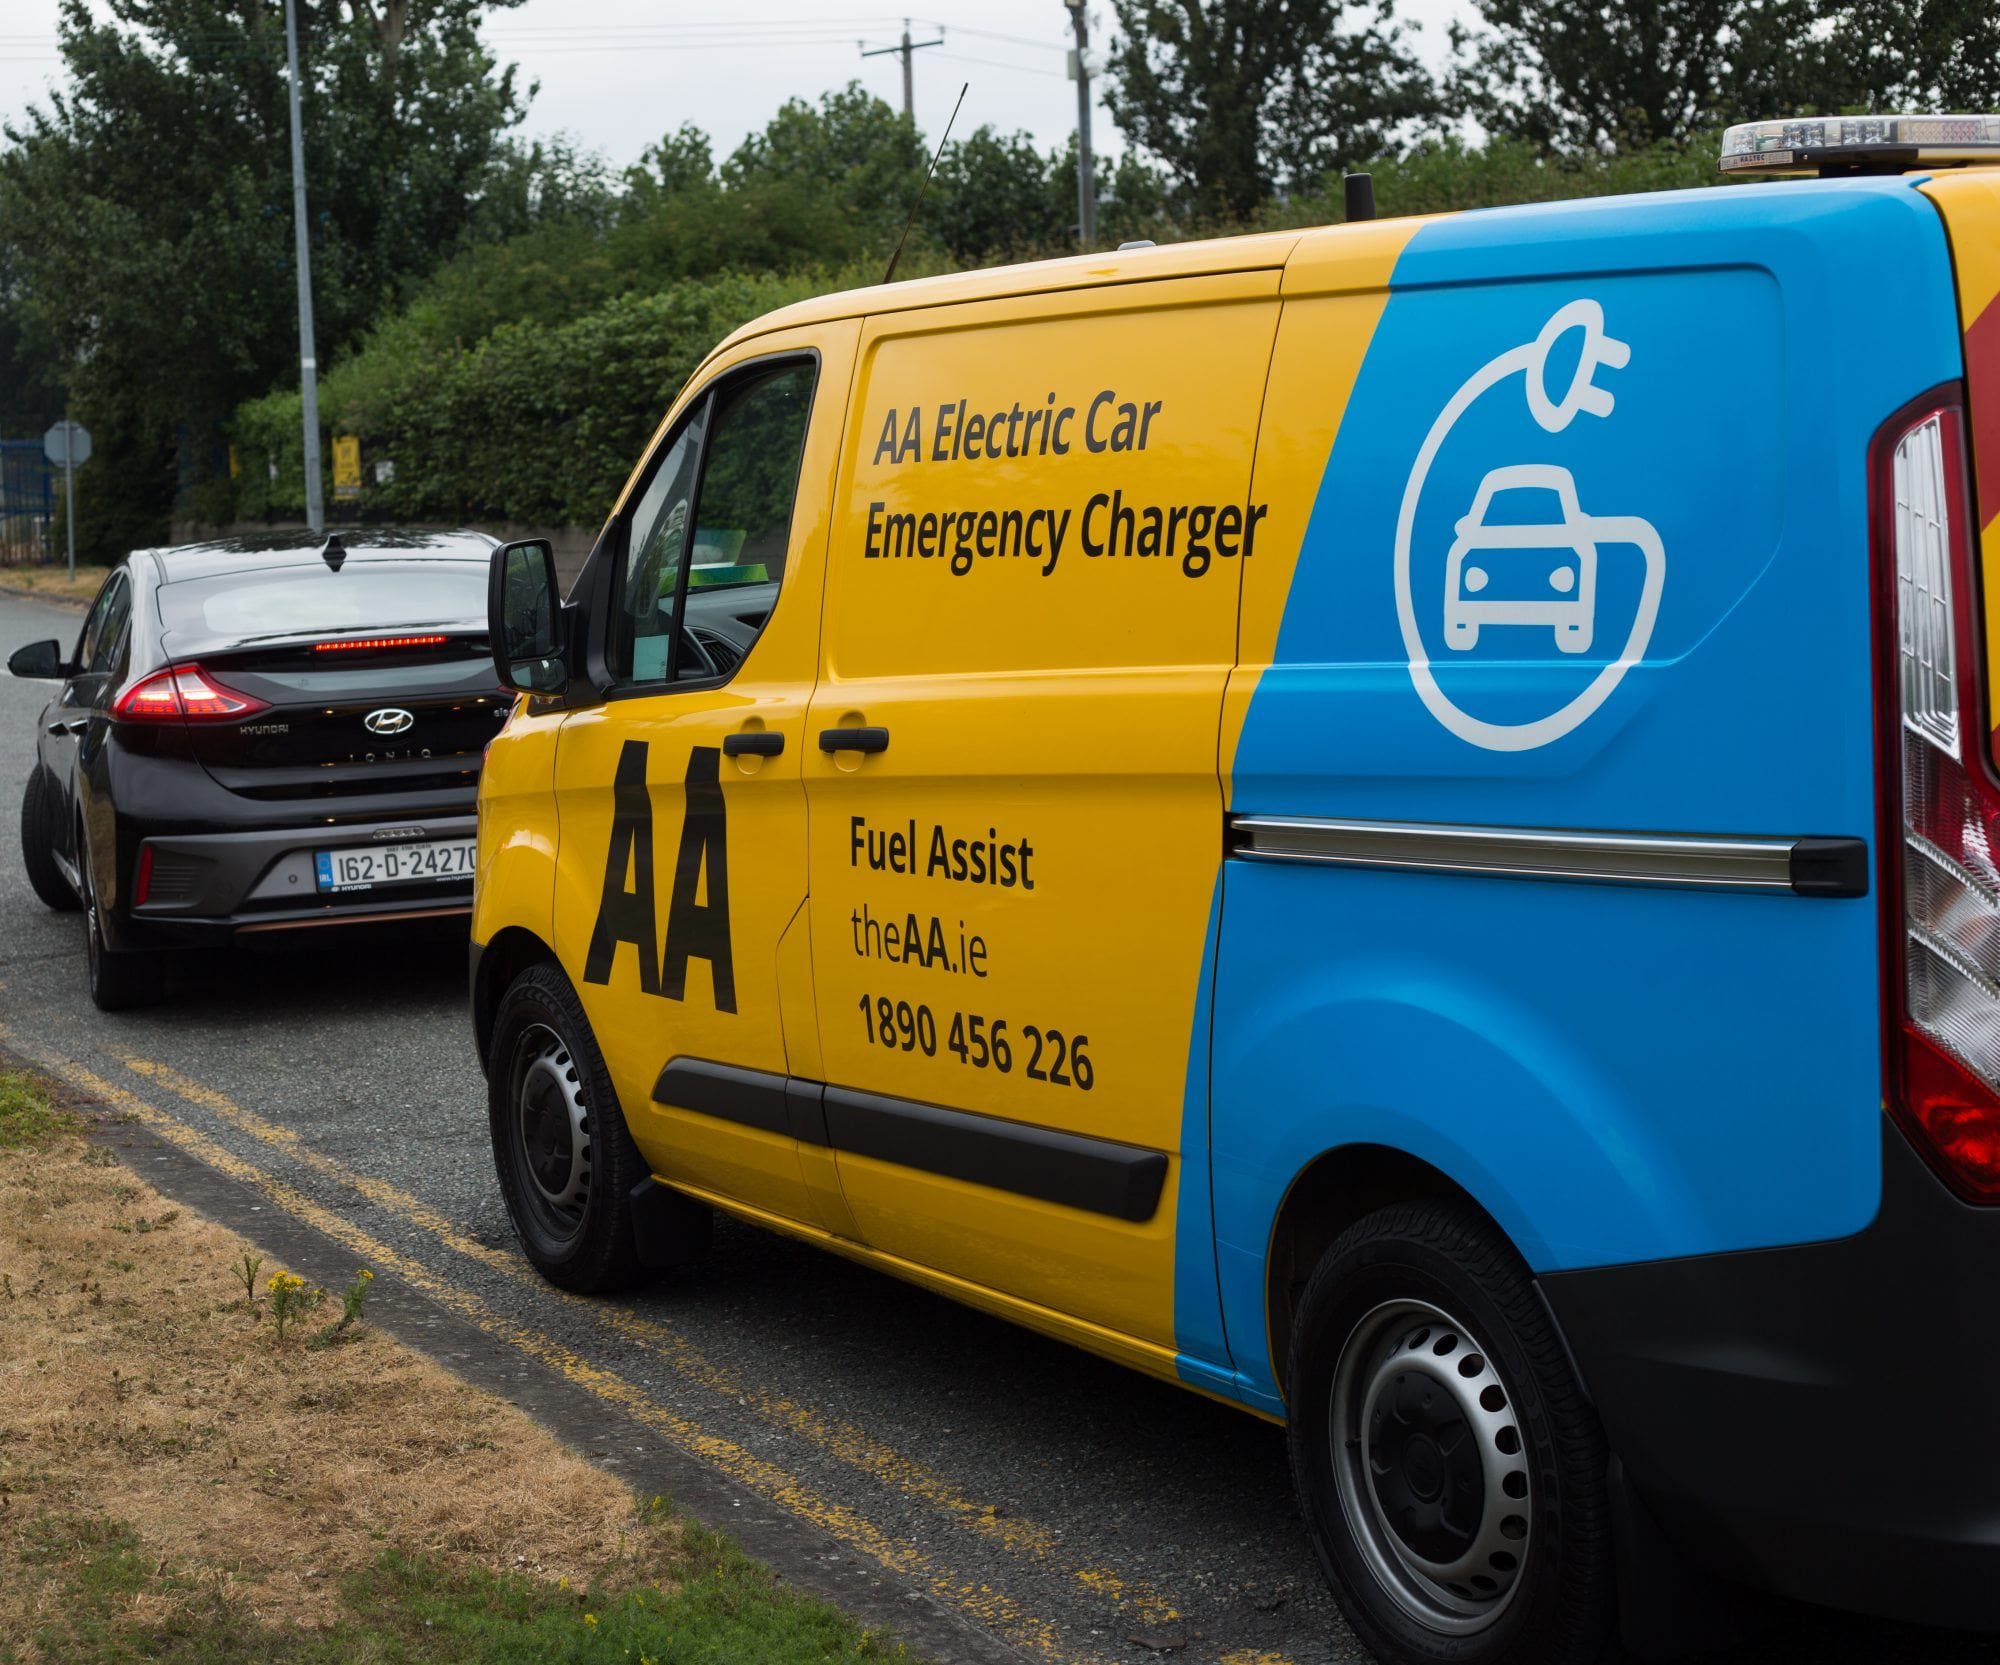 One of the AA's portable charger vans on the roadside, marked AA Electric Car Emergency Charger